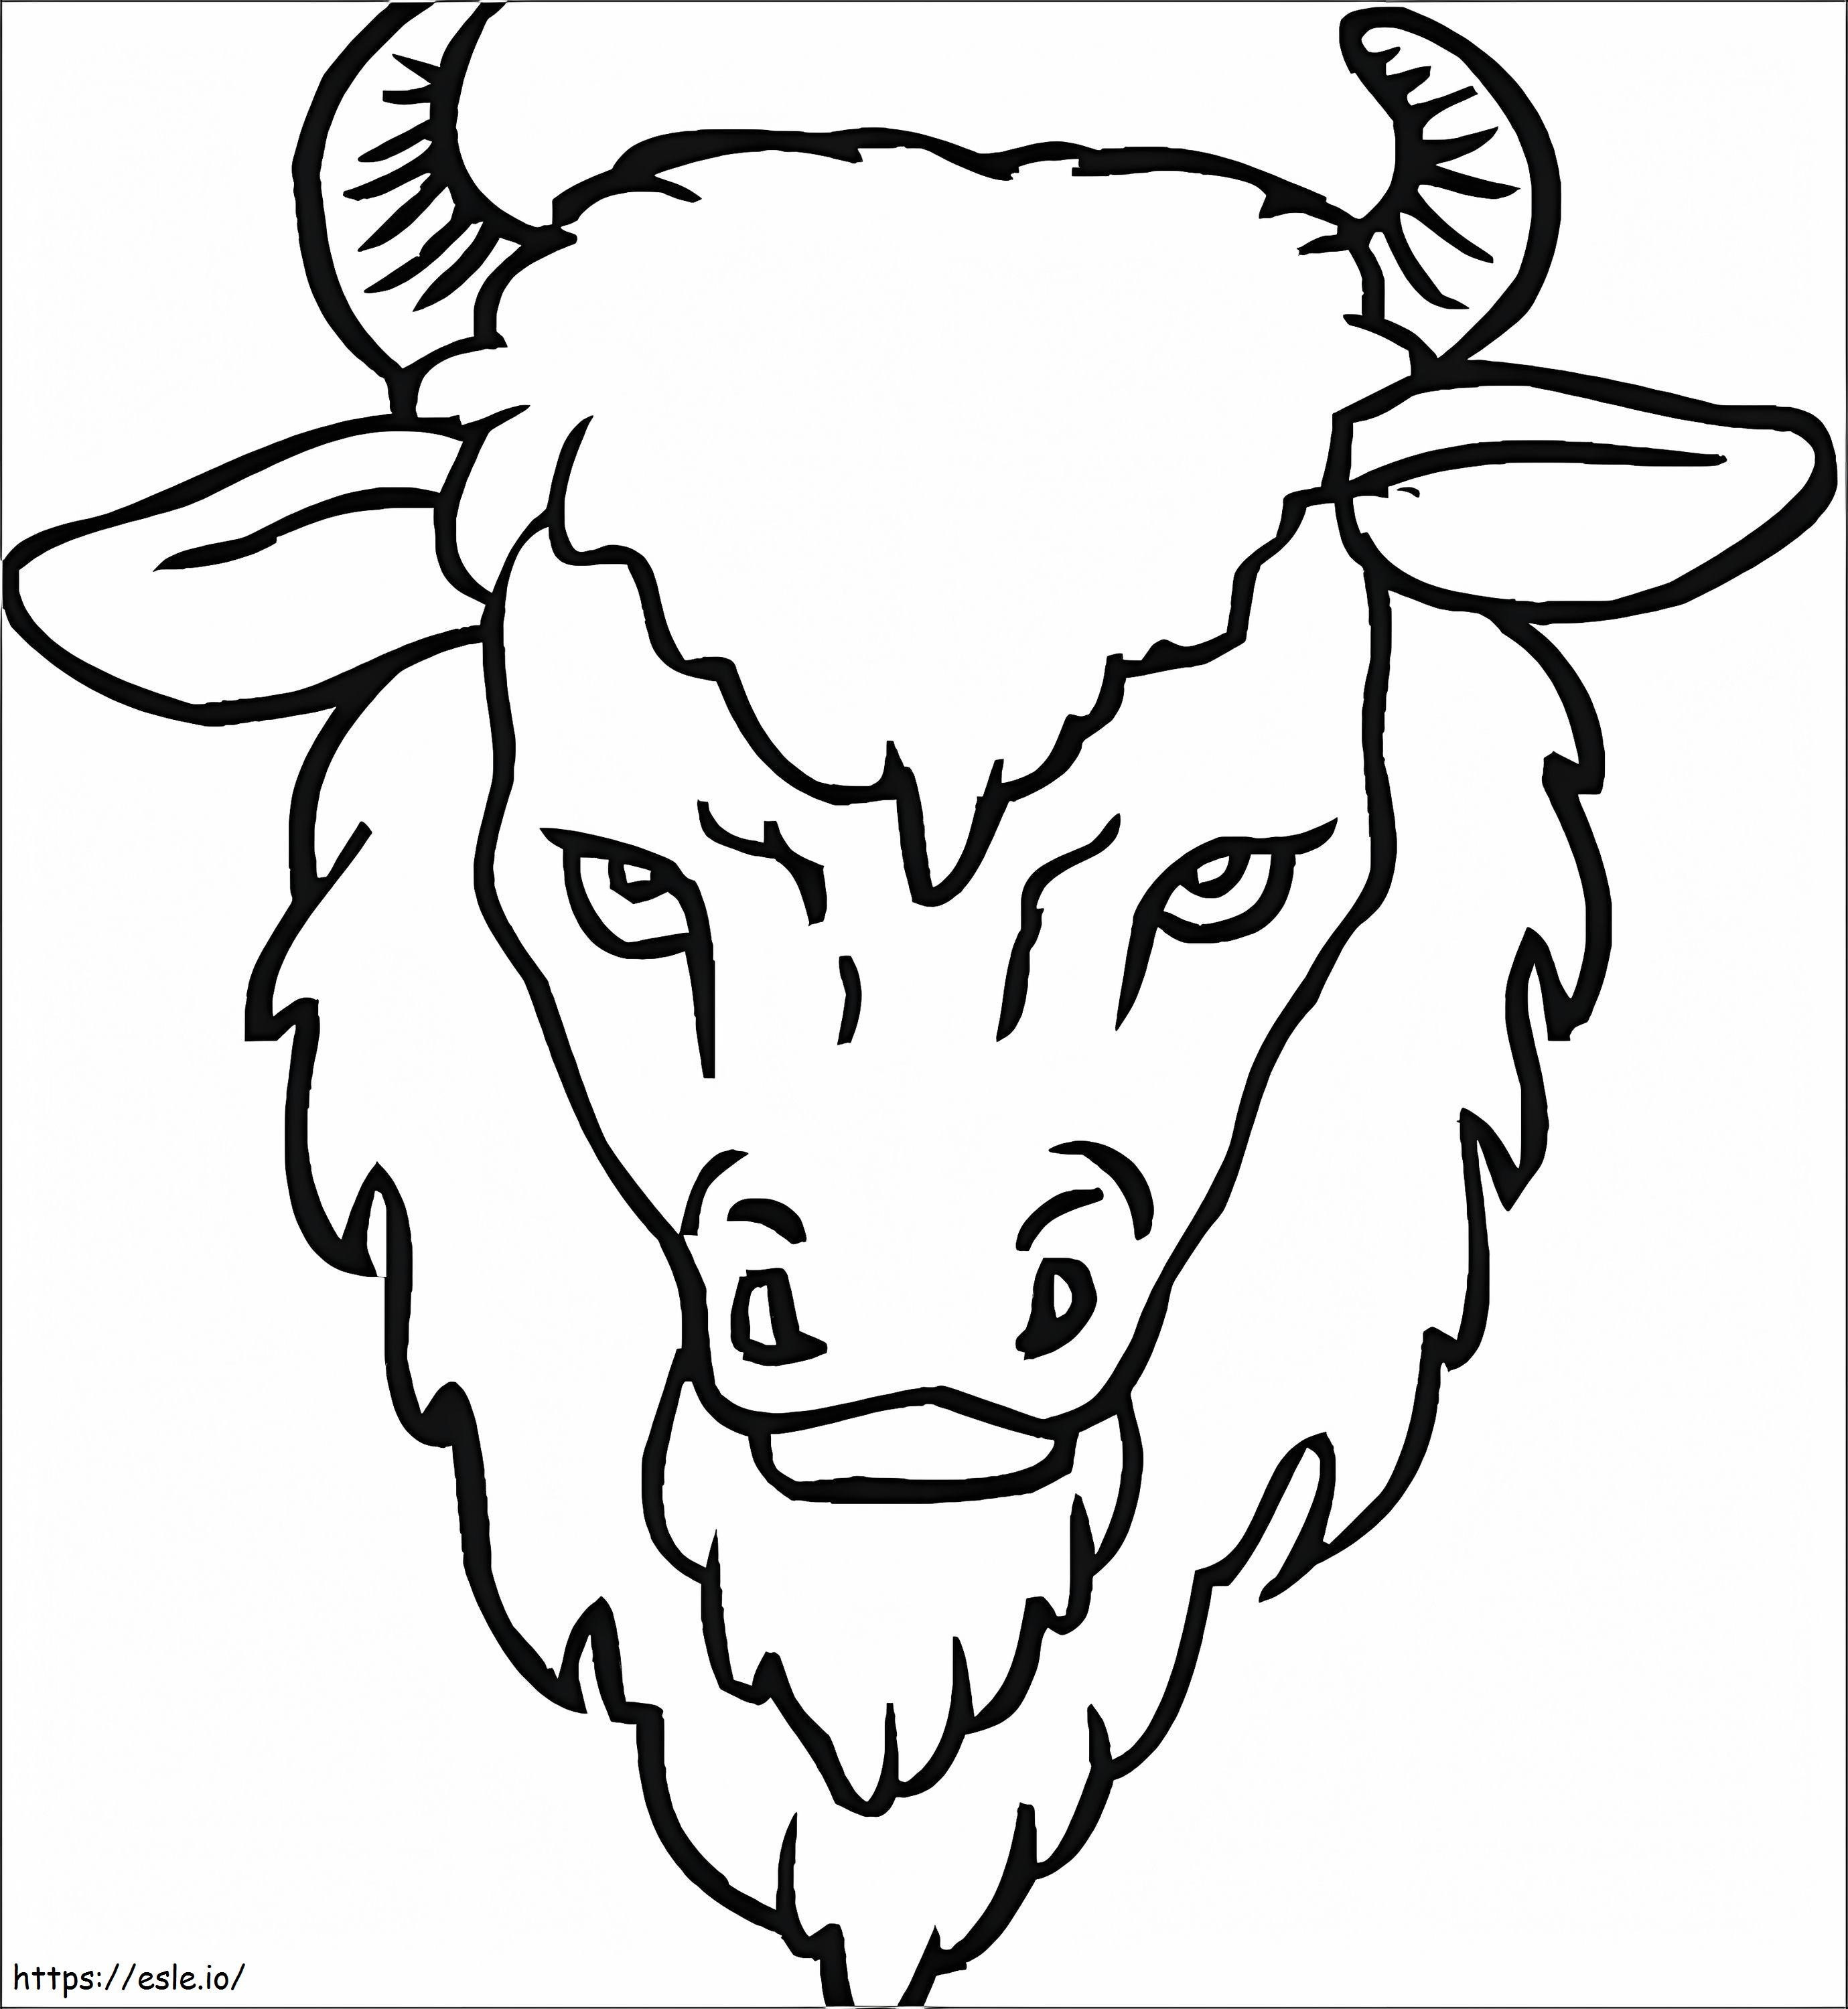 Bison Head coloring page